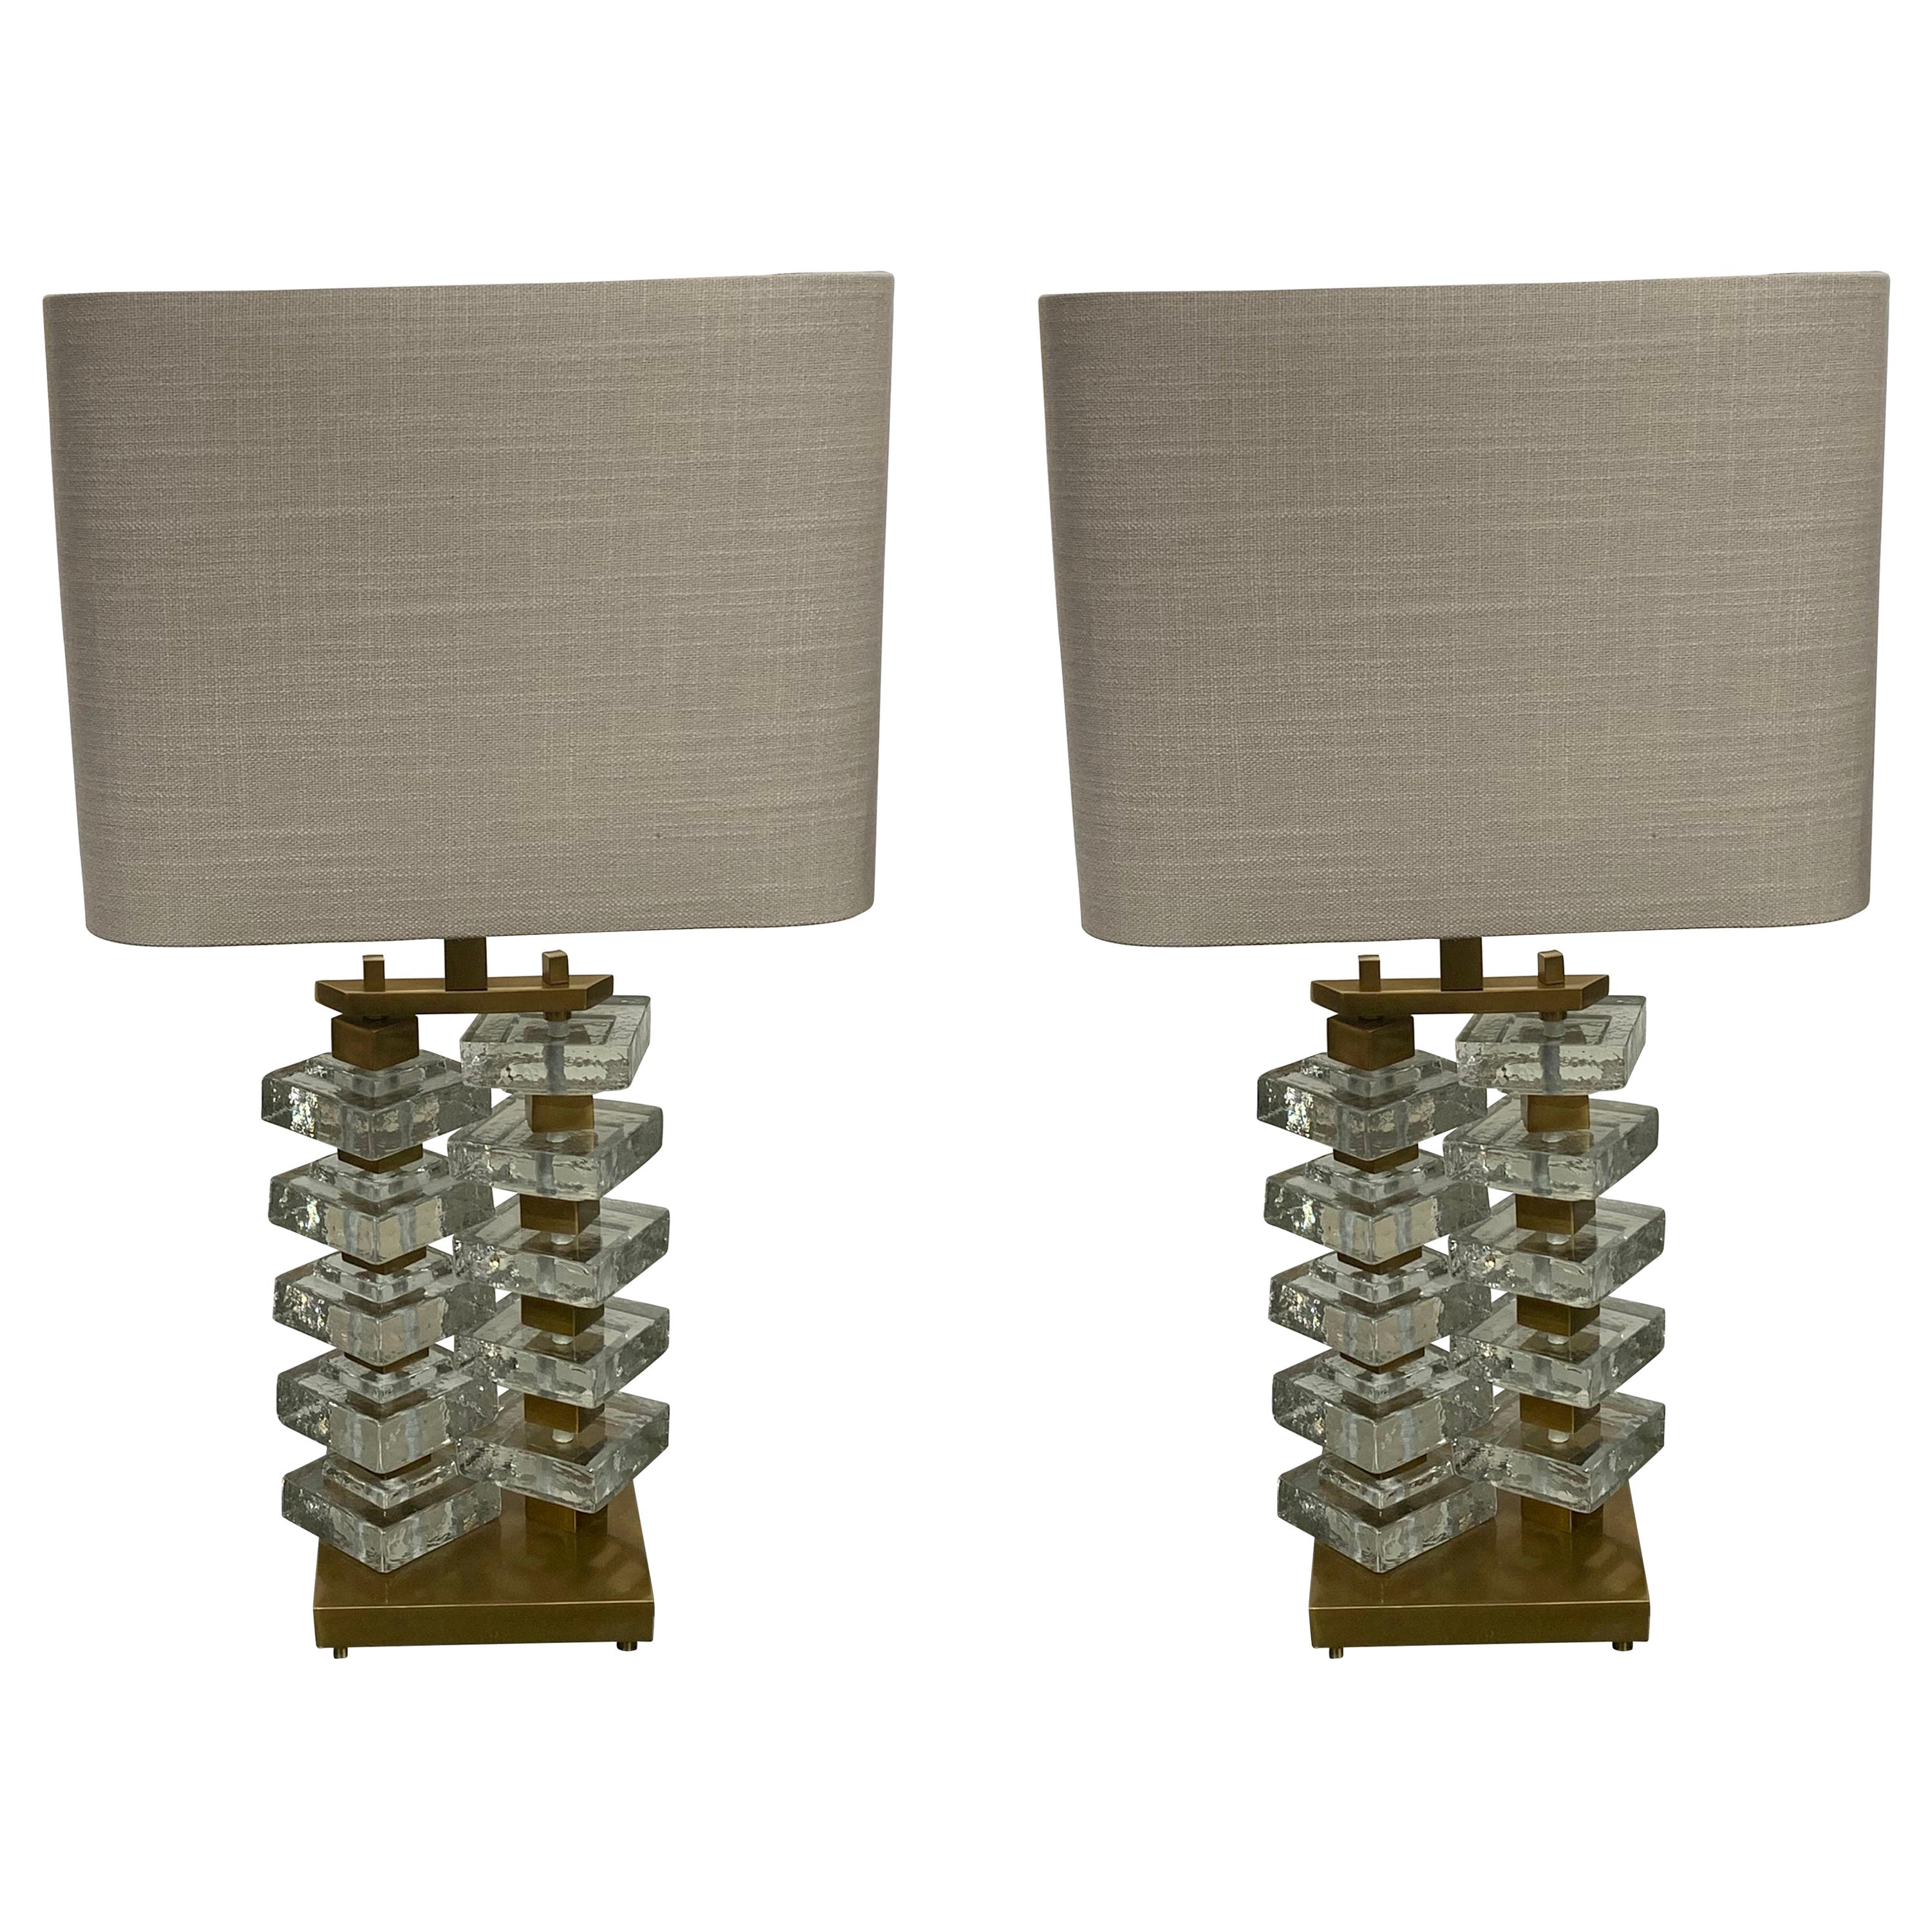 Pair of Thick Textured Glass Lamps, Romania, Contemporary